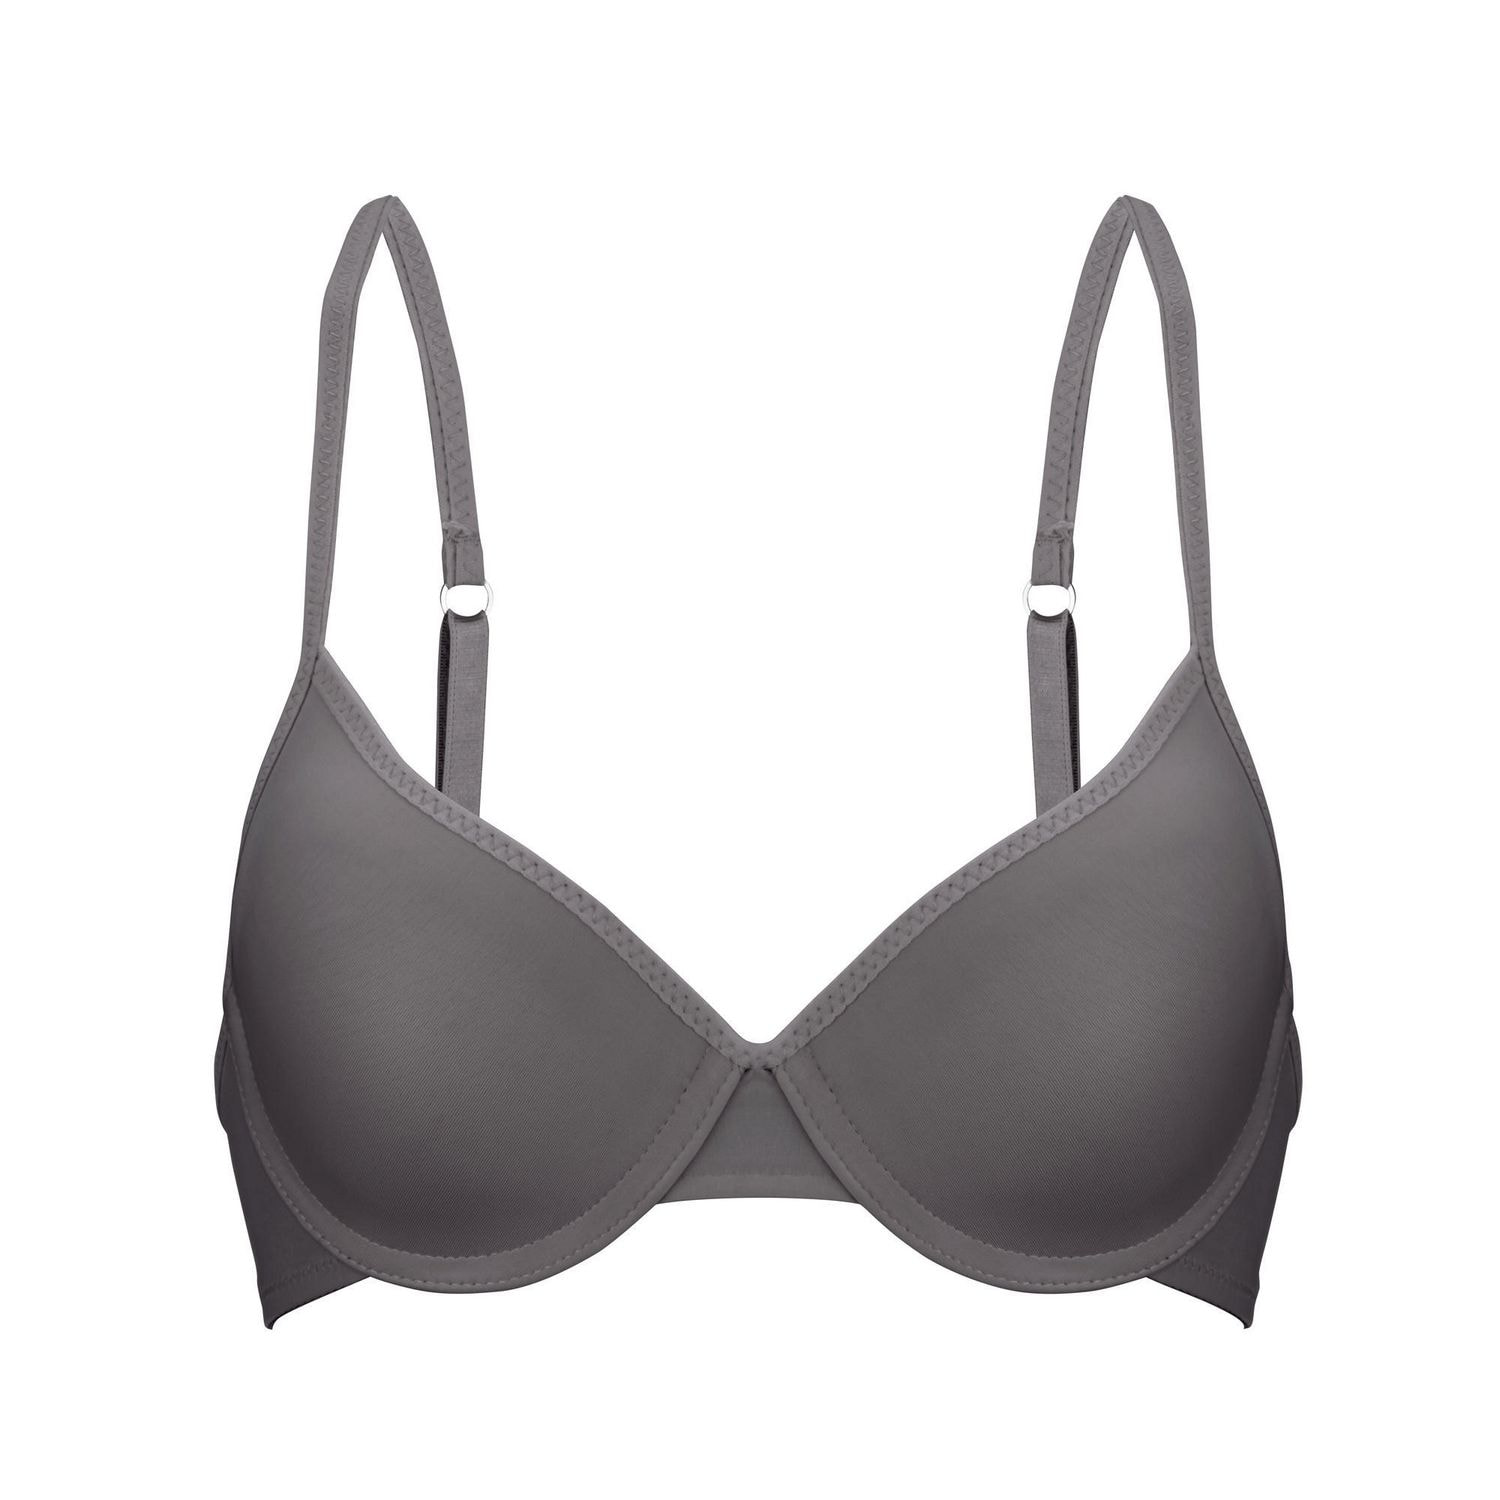 What is 36D bra size? Commonly, 36D bra size is on the large side